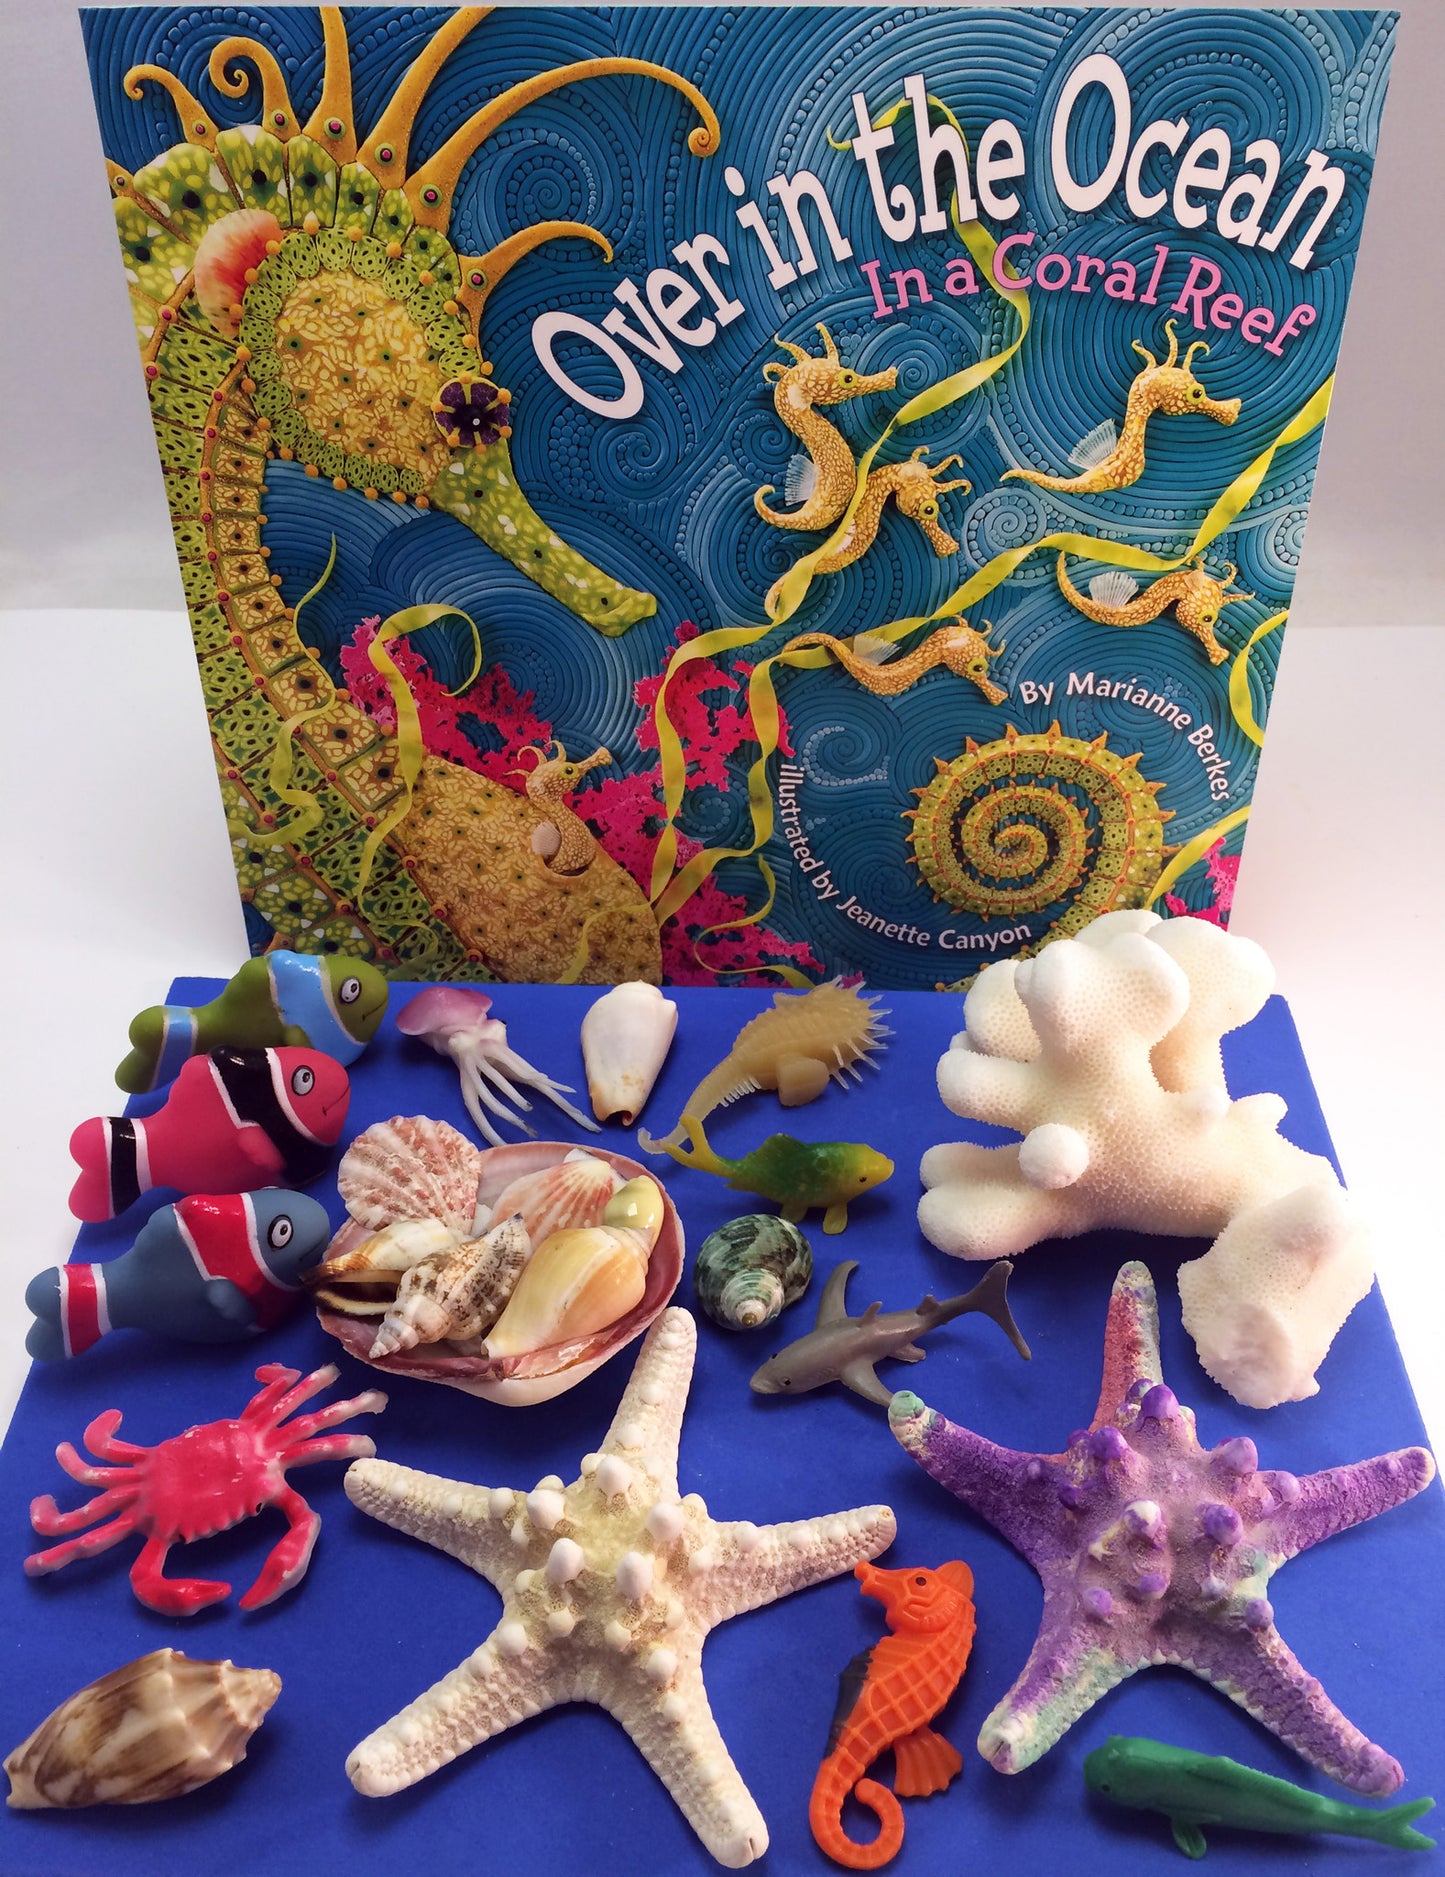 Coral reef themed Fun and educational activities and games for kids